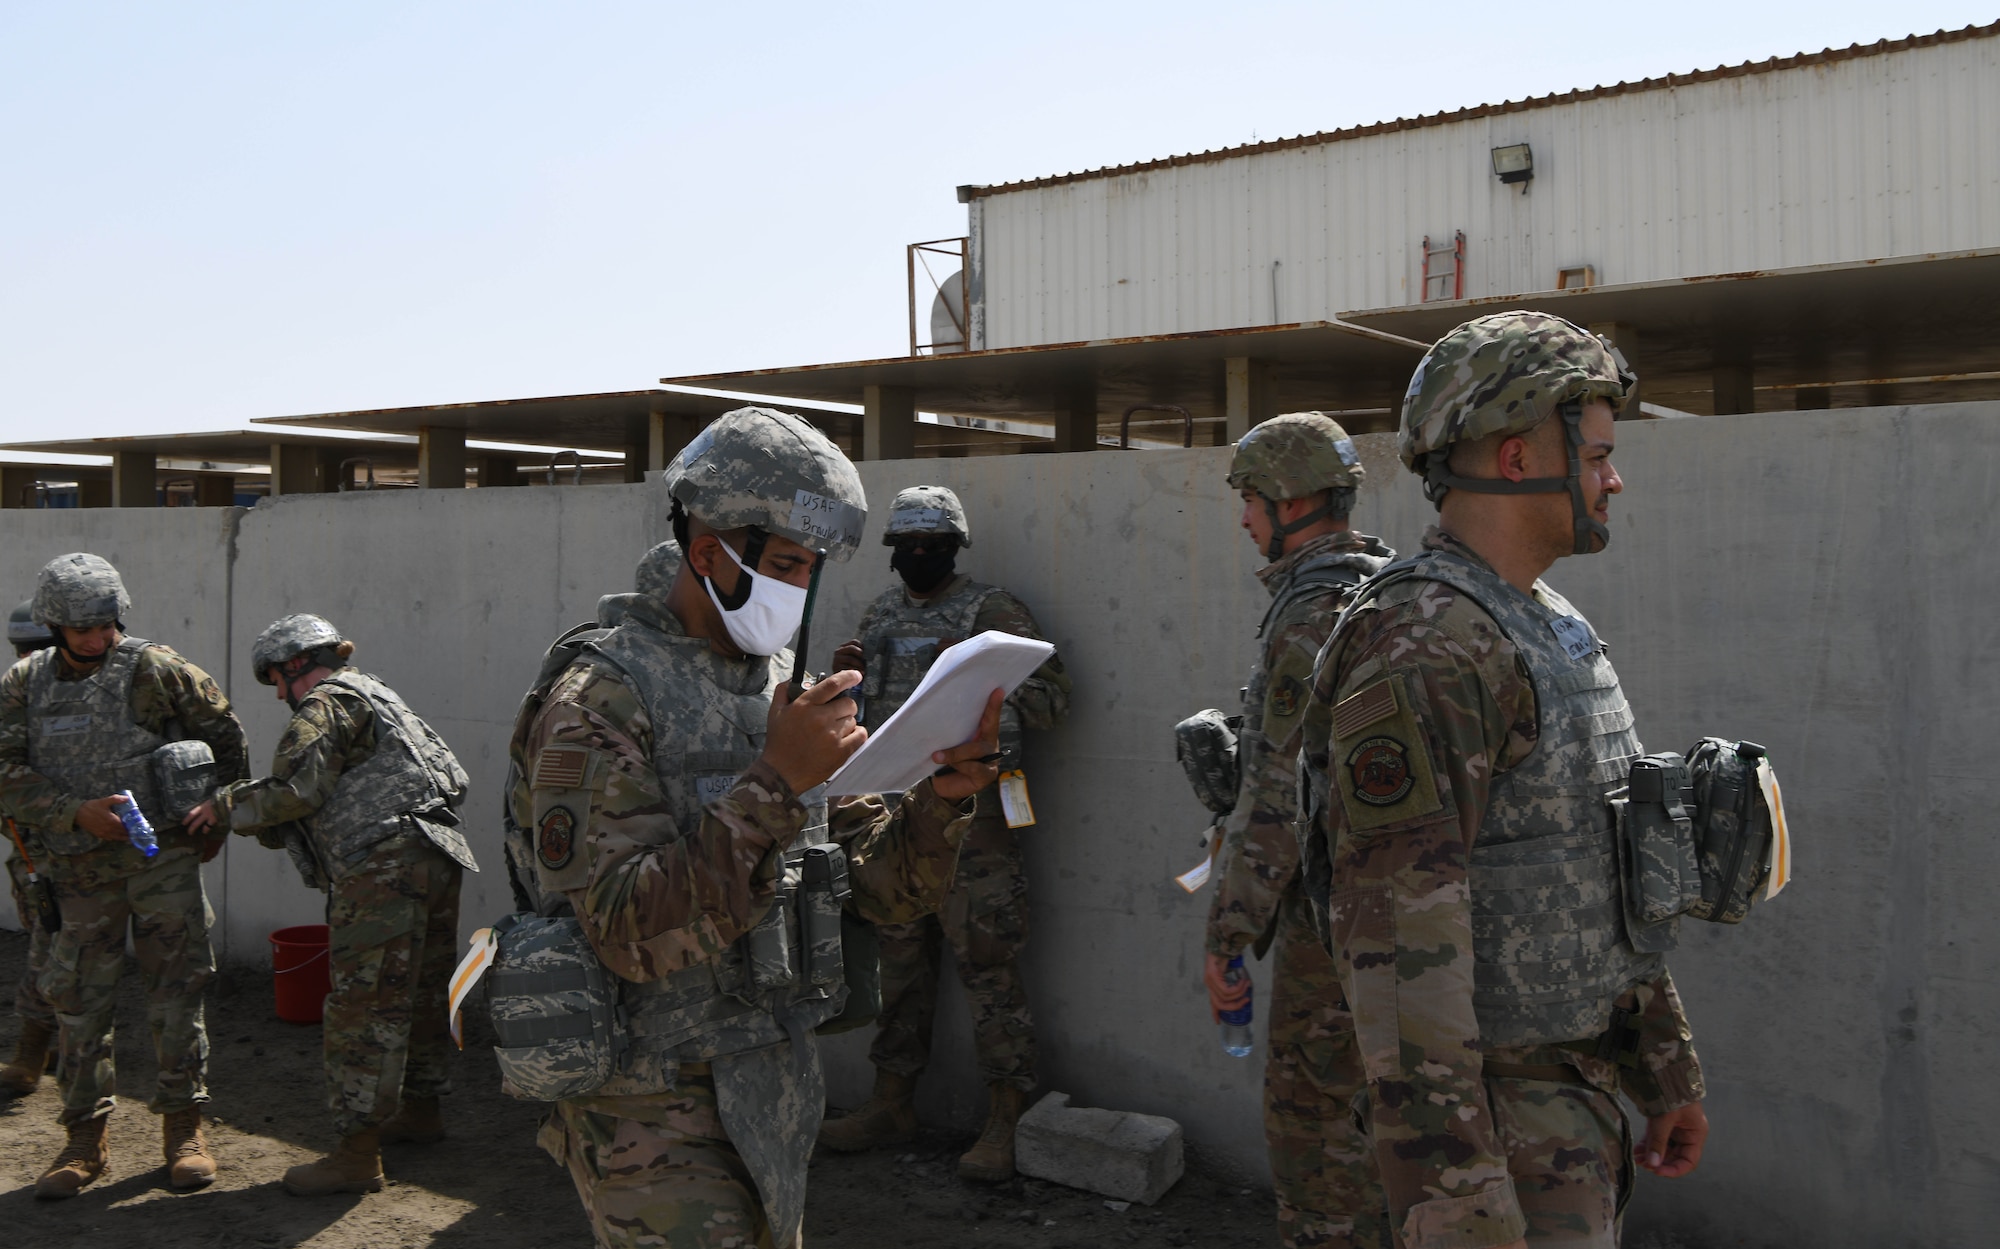 Airmen from the 380th Expeditionary Civil Engineer Squadron go through accountability checklists after a bunker dive during a rotational exercise July 21, 2020, at Al Dhafra Air Base, United Arab Emirates. The exercise gives deployers an opportunity to execute some of the techniques taught to them during training at home station.